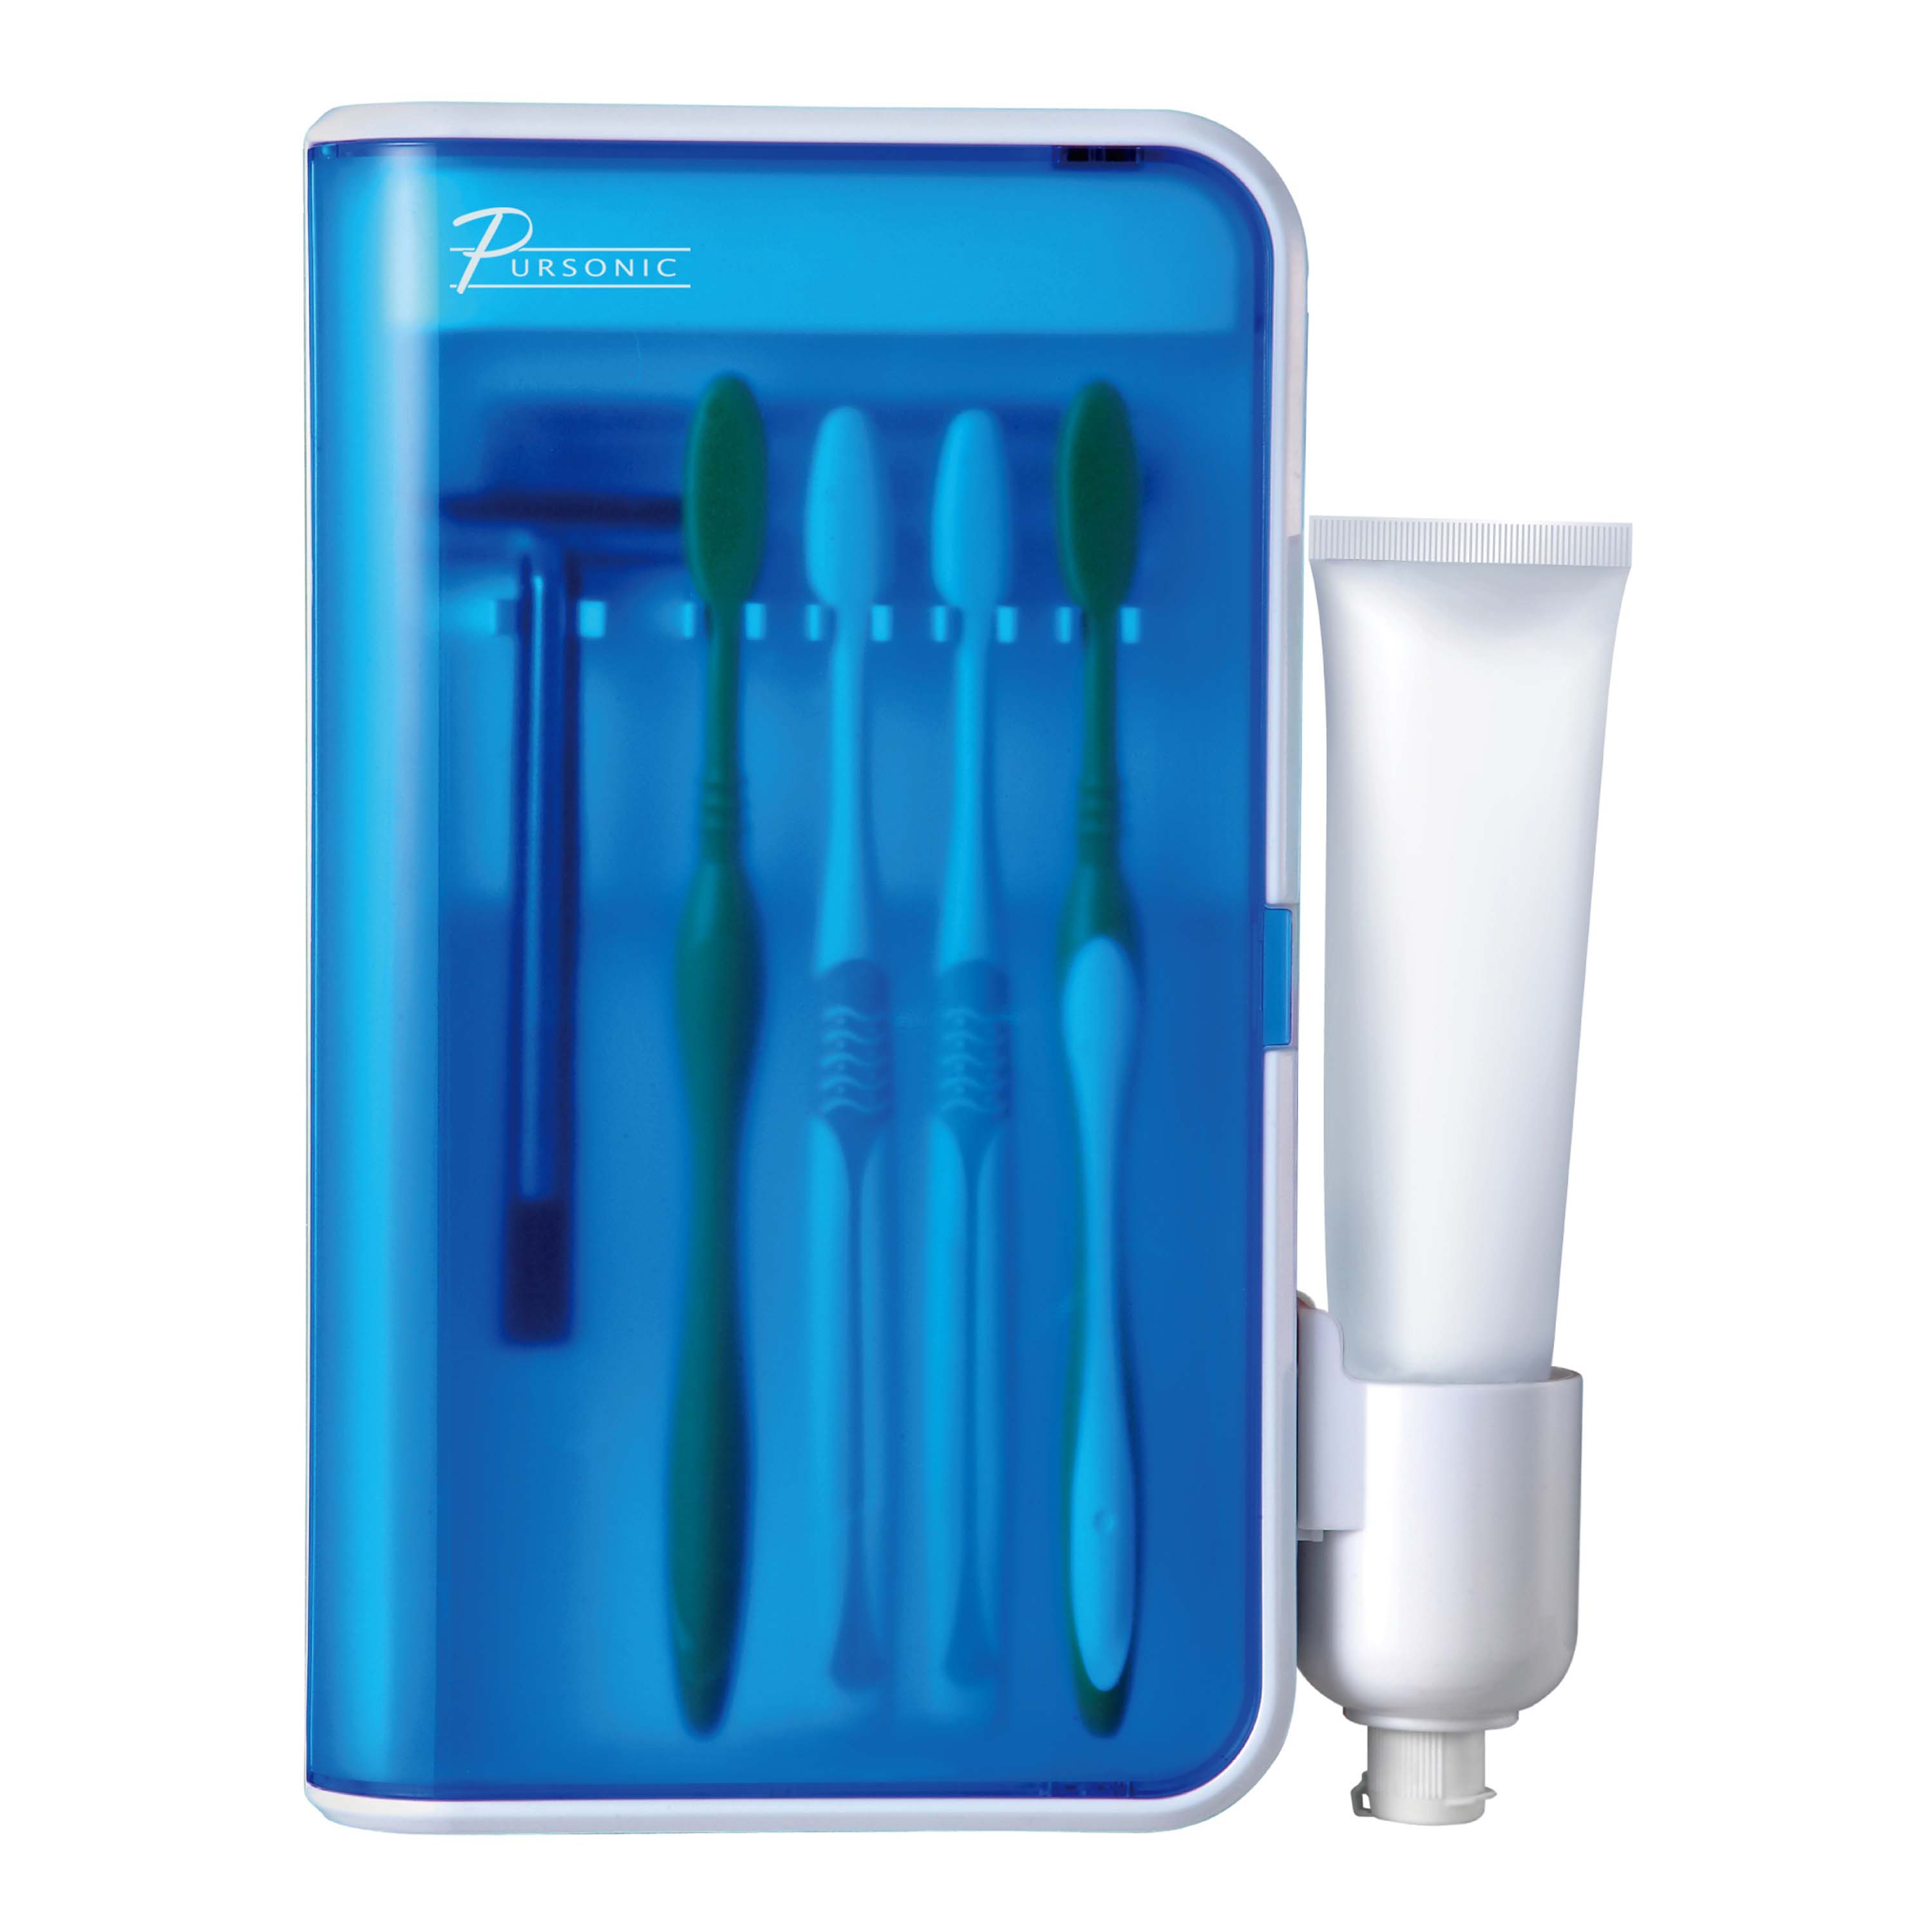 Pursonic S2 Toothbrush Sanitizer UV Toothbrush Sanitizier - Blue and Silver